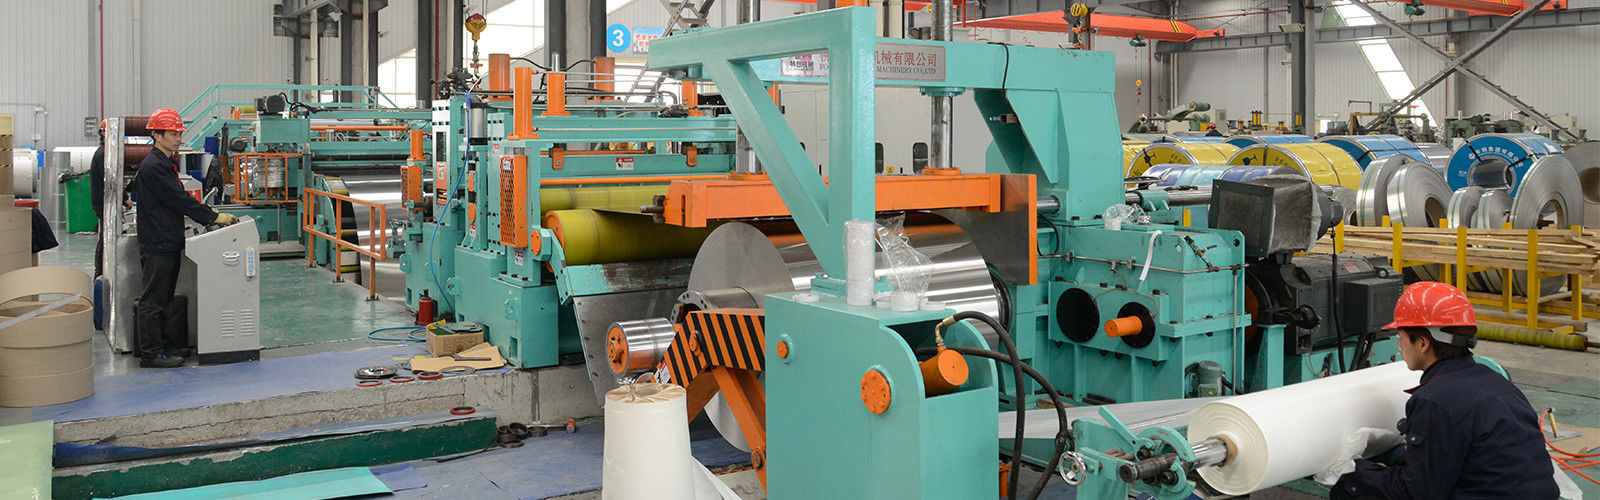 quality Cold Rolled Stainless Steel Sheet factory